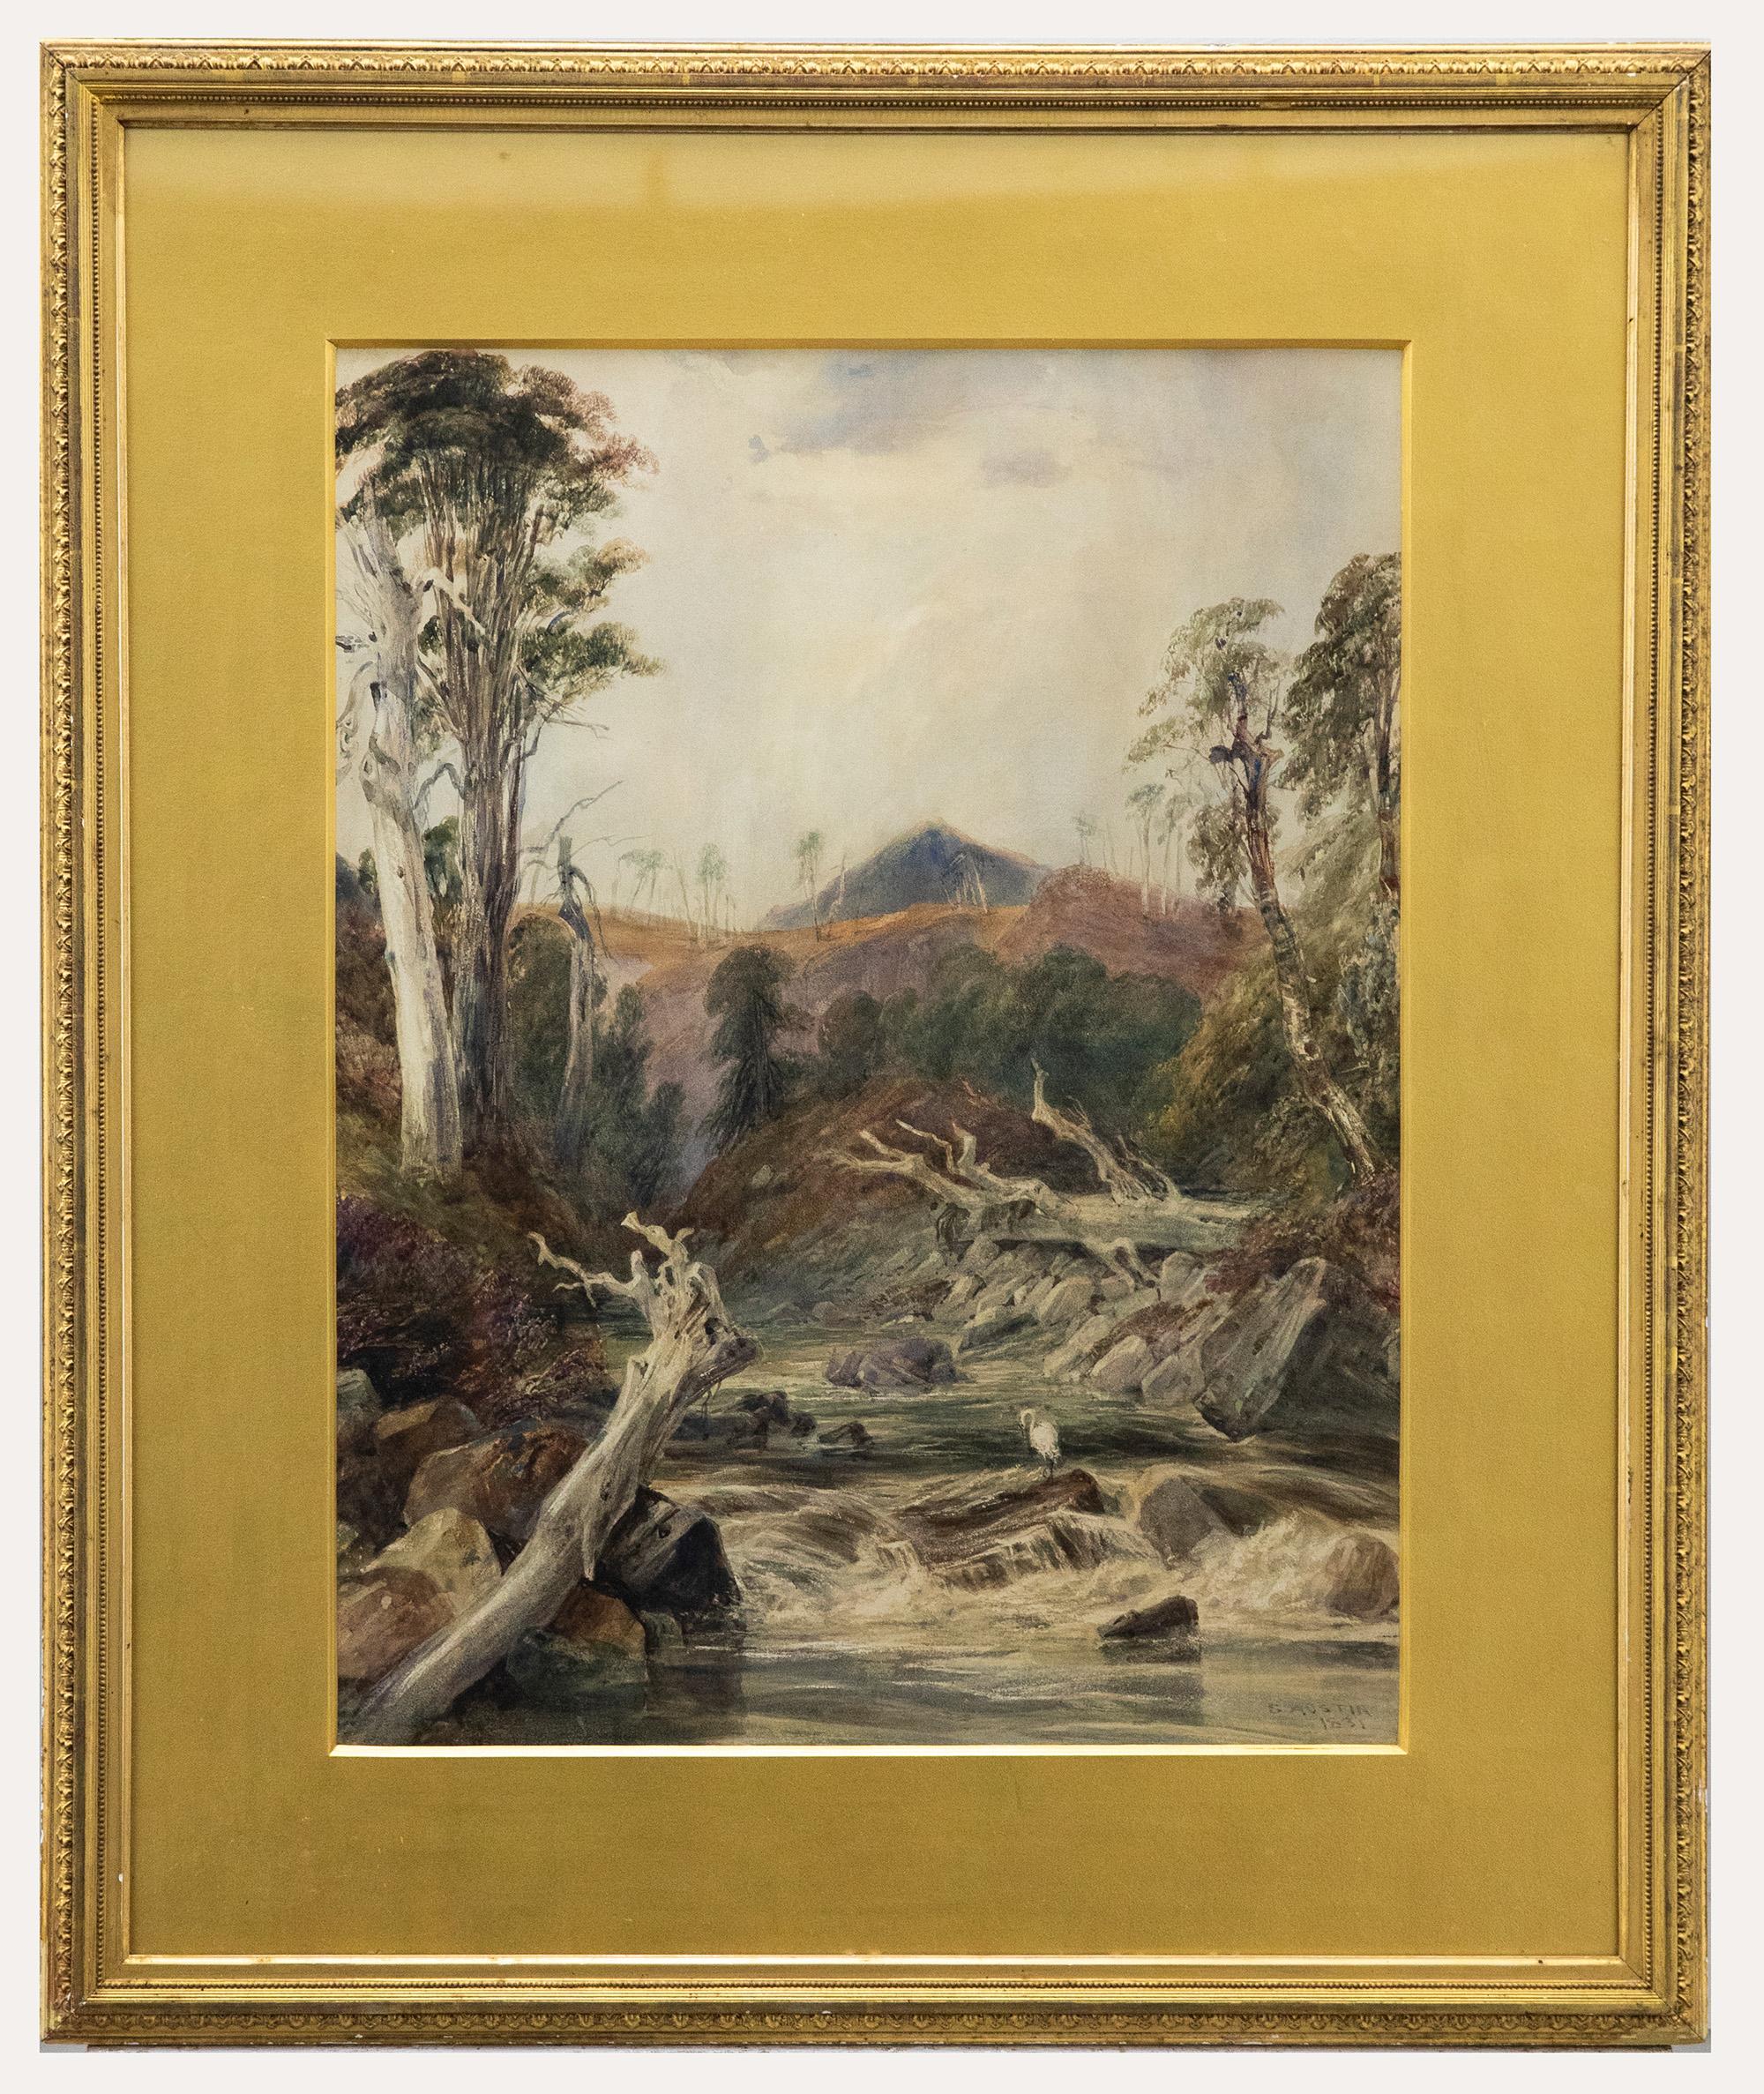 A charming watercolour scene depicting a river flowing between banks with fallen trees. Perched on a rock in the center of the river a heron looks for fish in the stream. Signed and dated to the lower right. Presented in a gilt frame and gold card